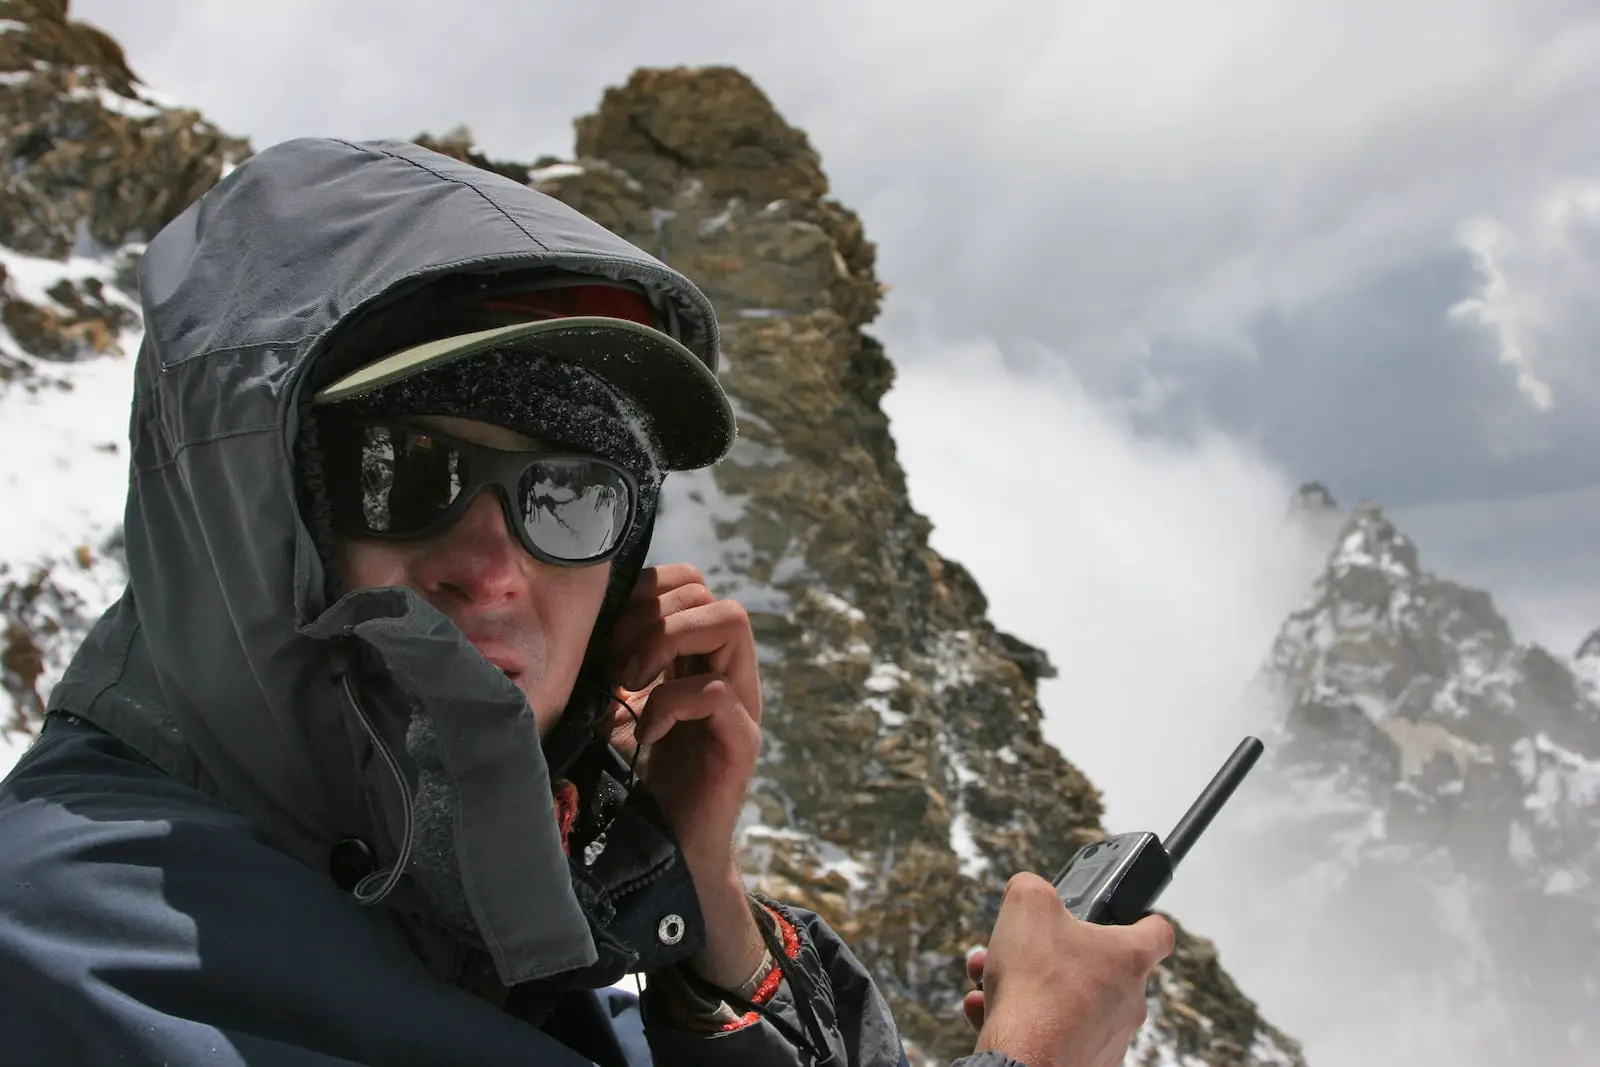 What Are the Best Communication Devices for Safe Living in Remote Areas?